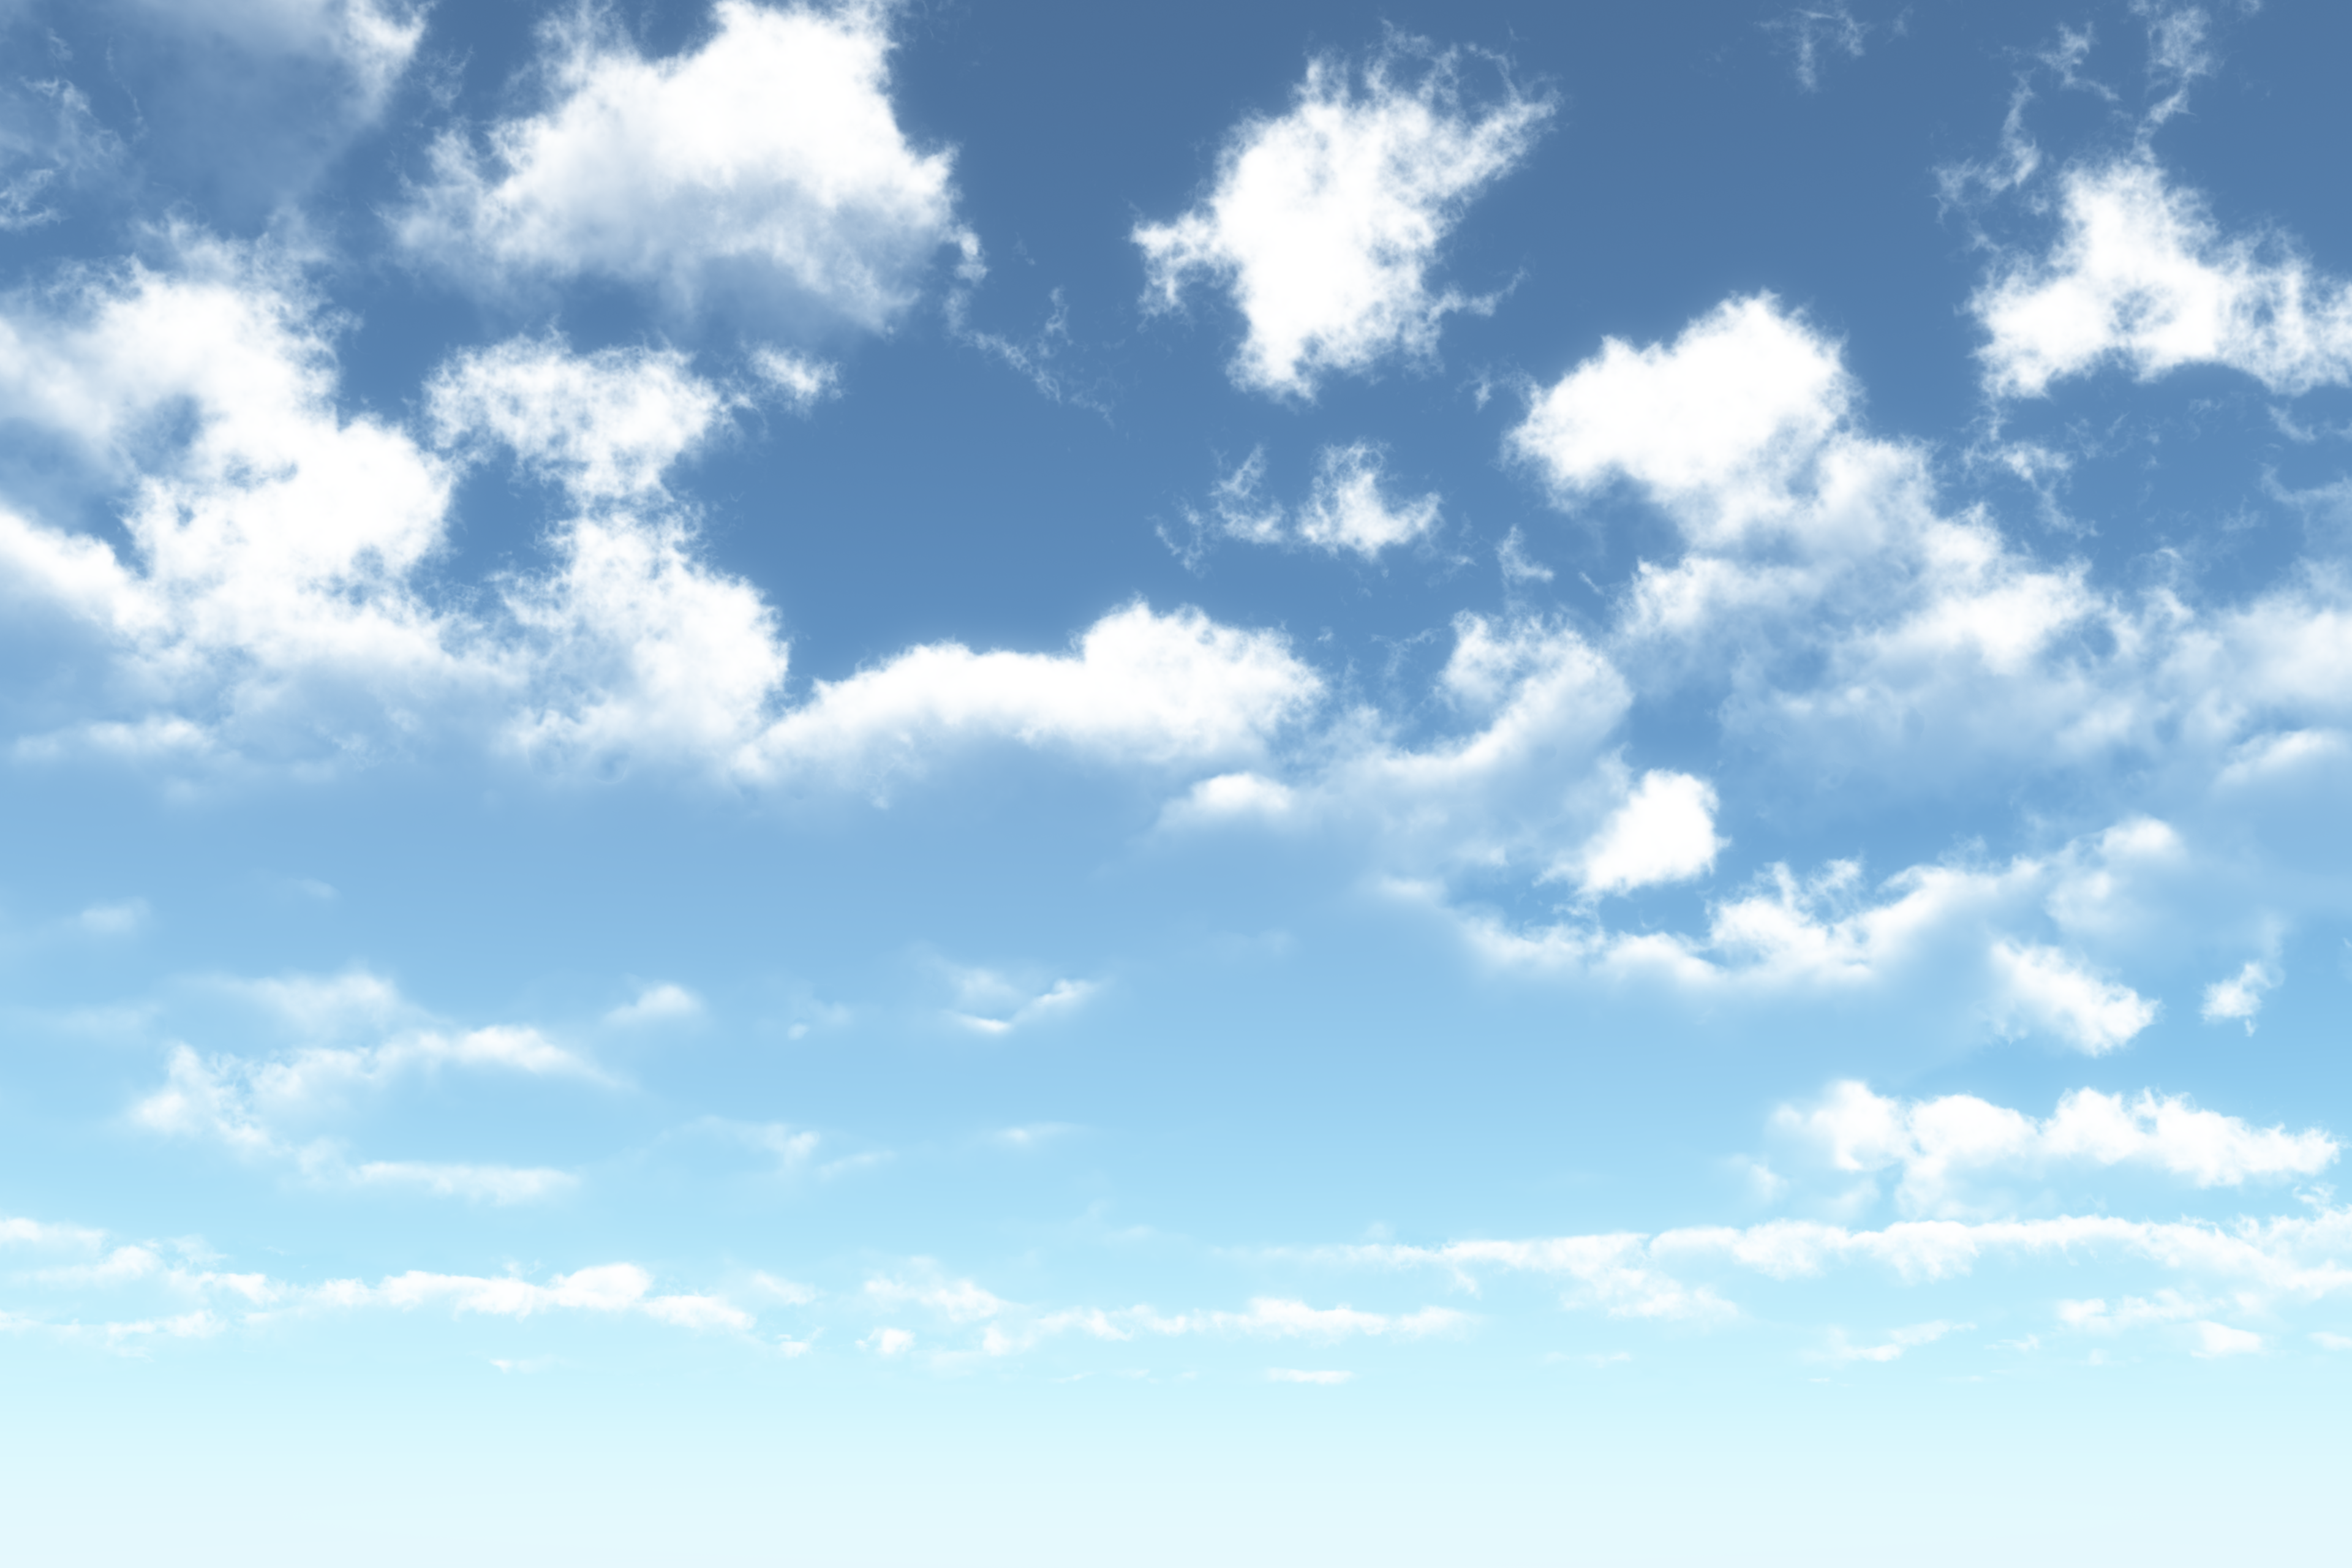 Summer Clouds (PSD) by macsix on Clipart library